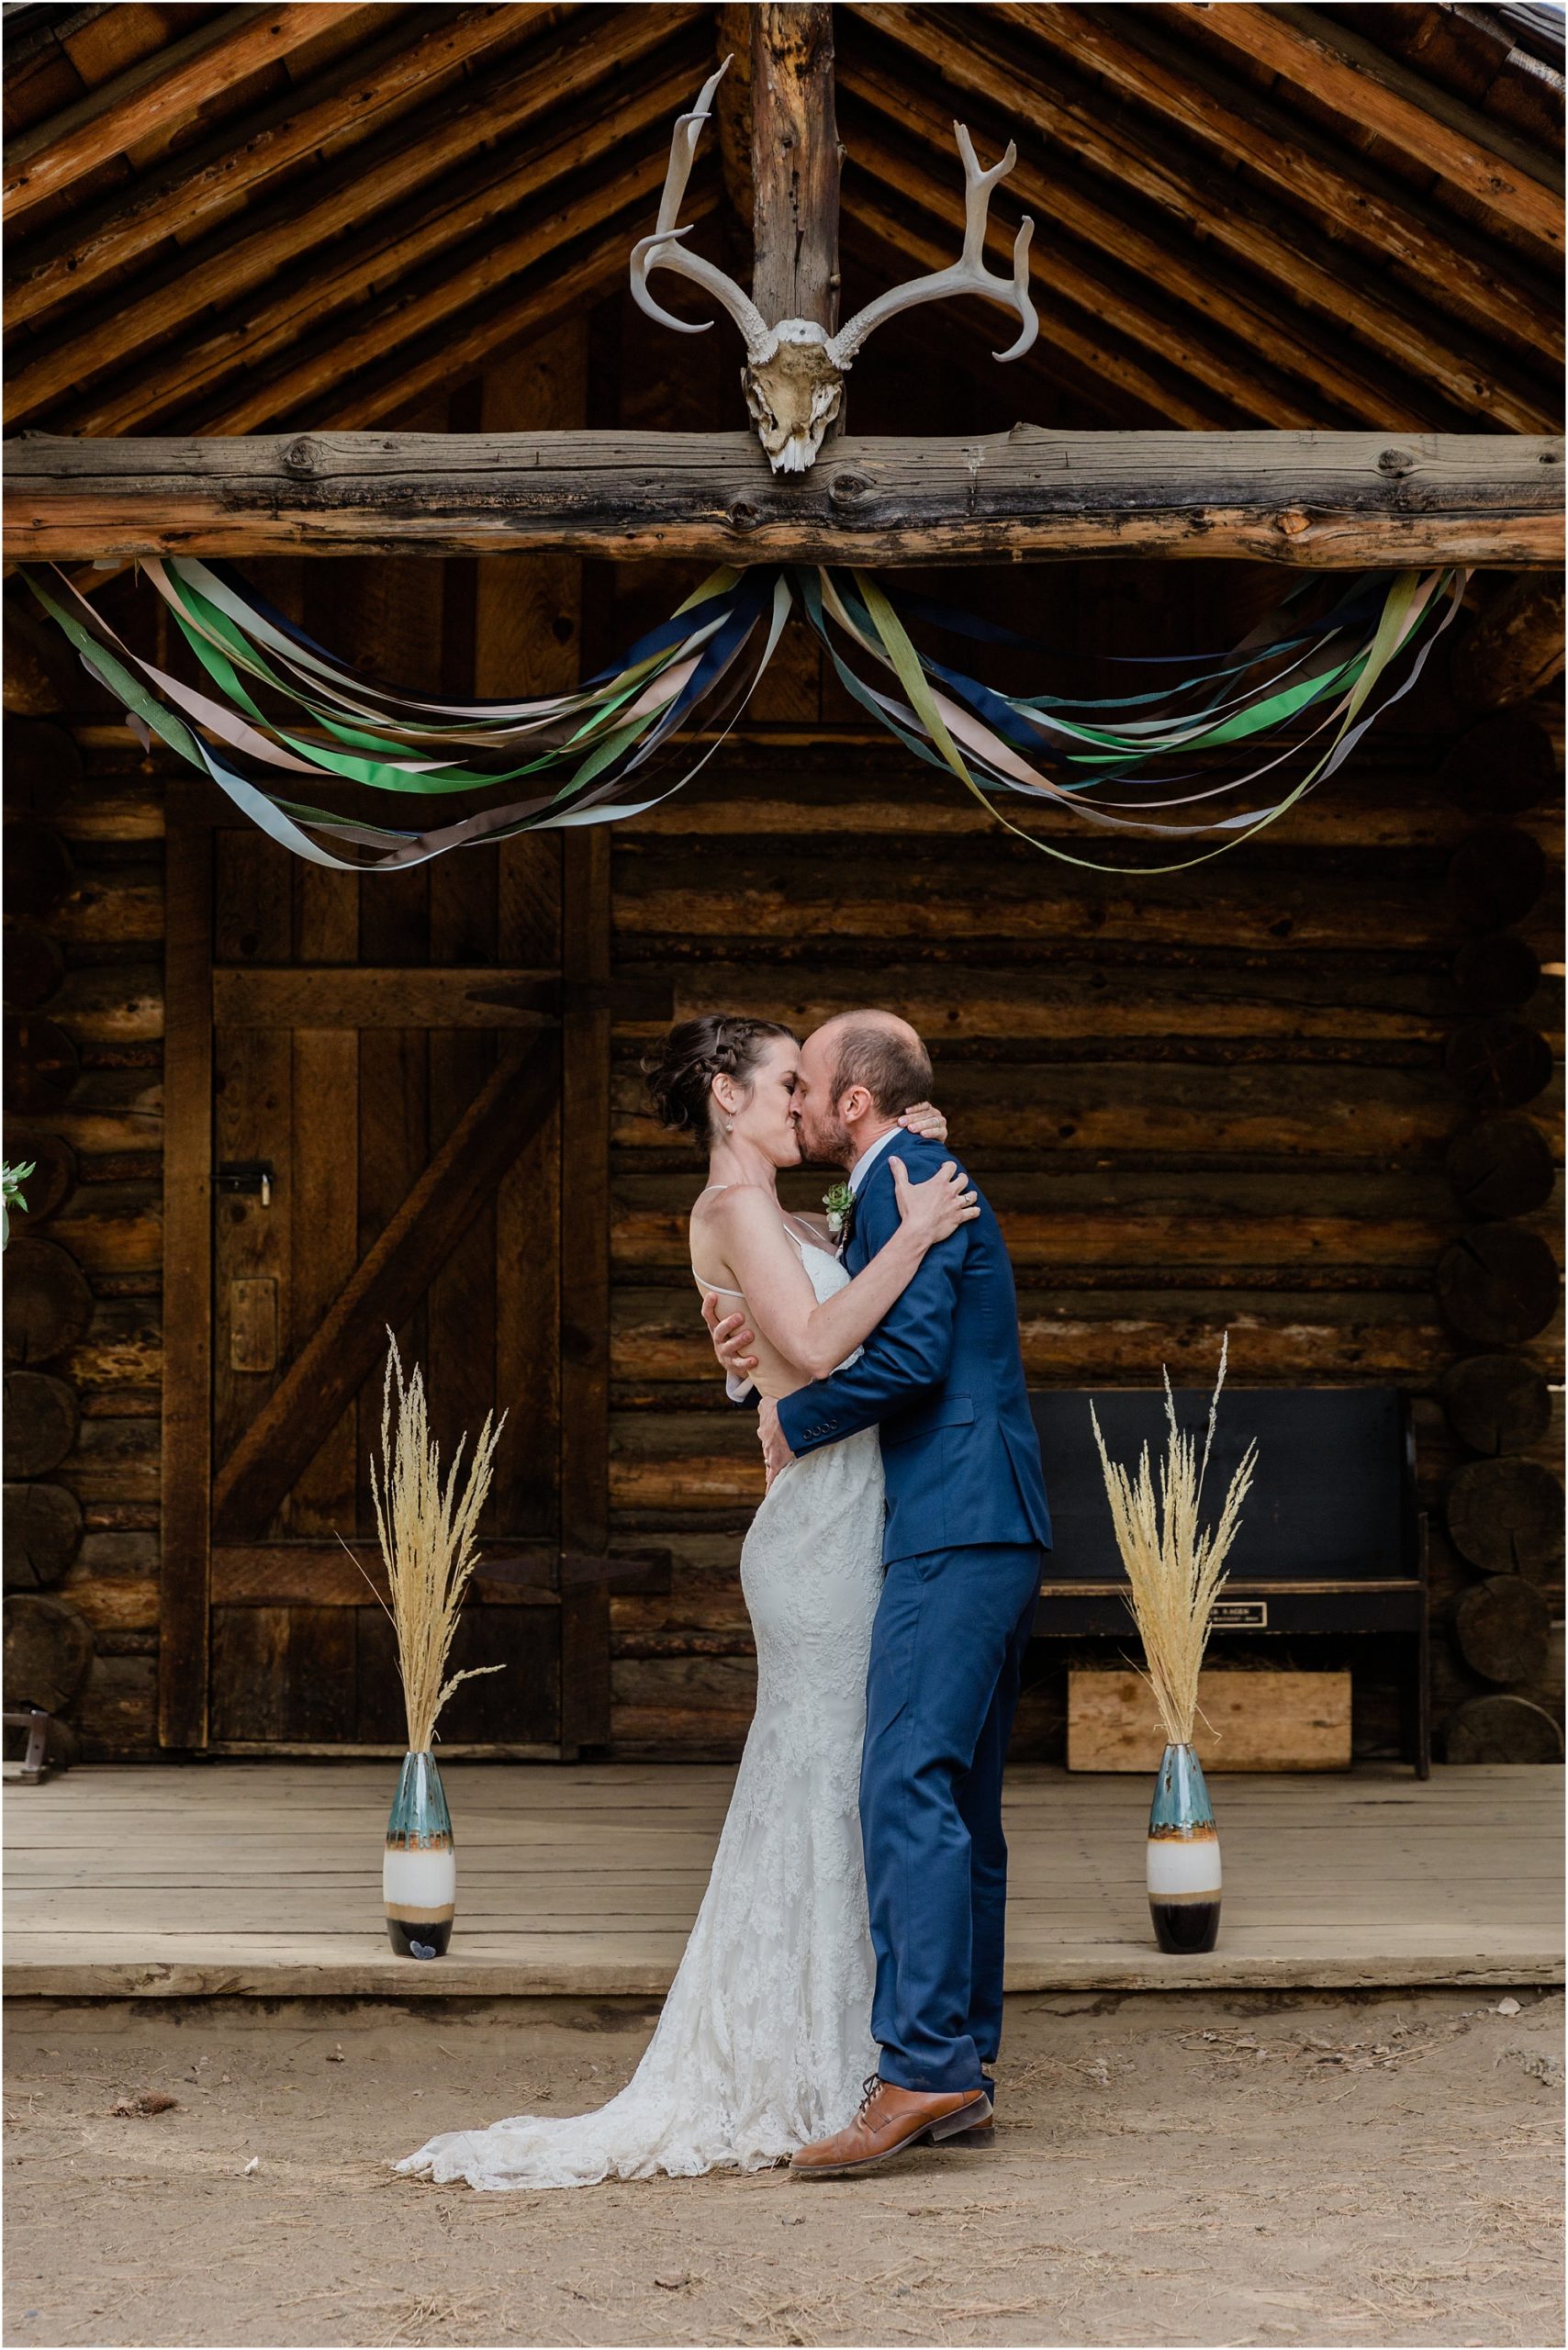 The couple kisses to seal the deal as they marry at their rustic outdoor wedding in Bend, OR. | Erica Swantek Photography